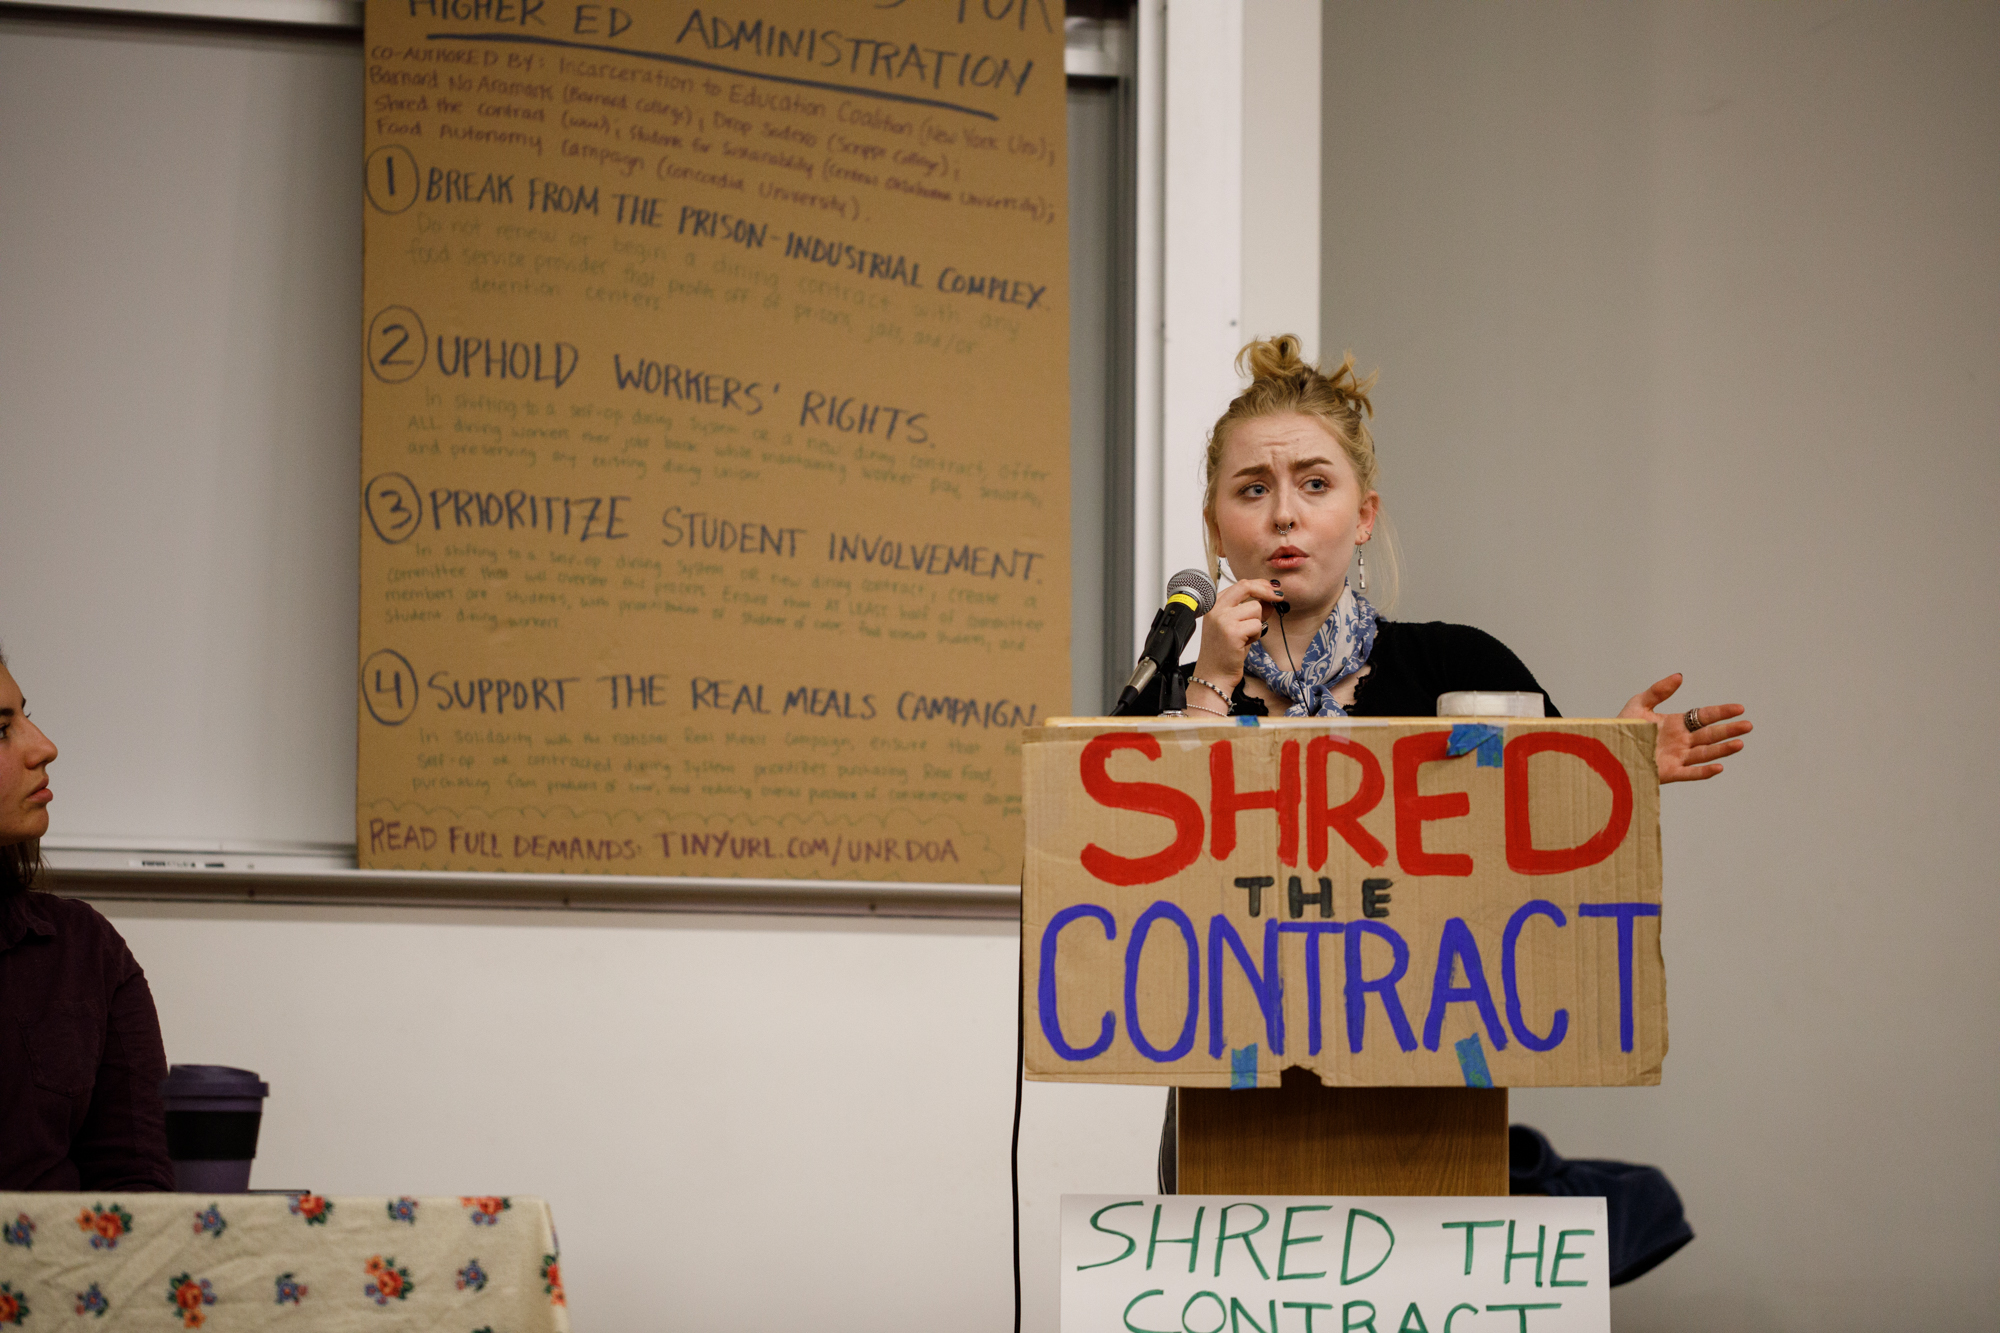 Image of Sophia Gamble speaking from the podium. The sign on the podium reads “Shred the Contract”.